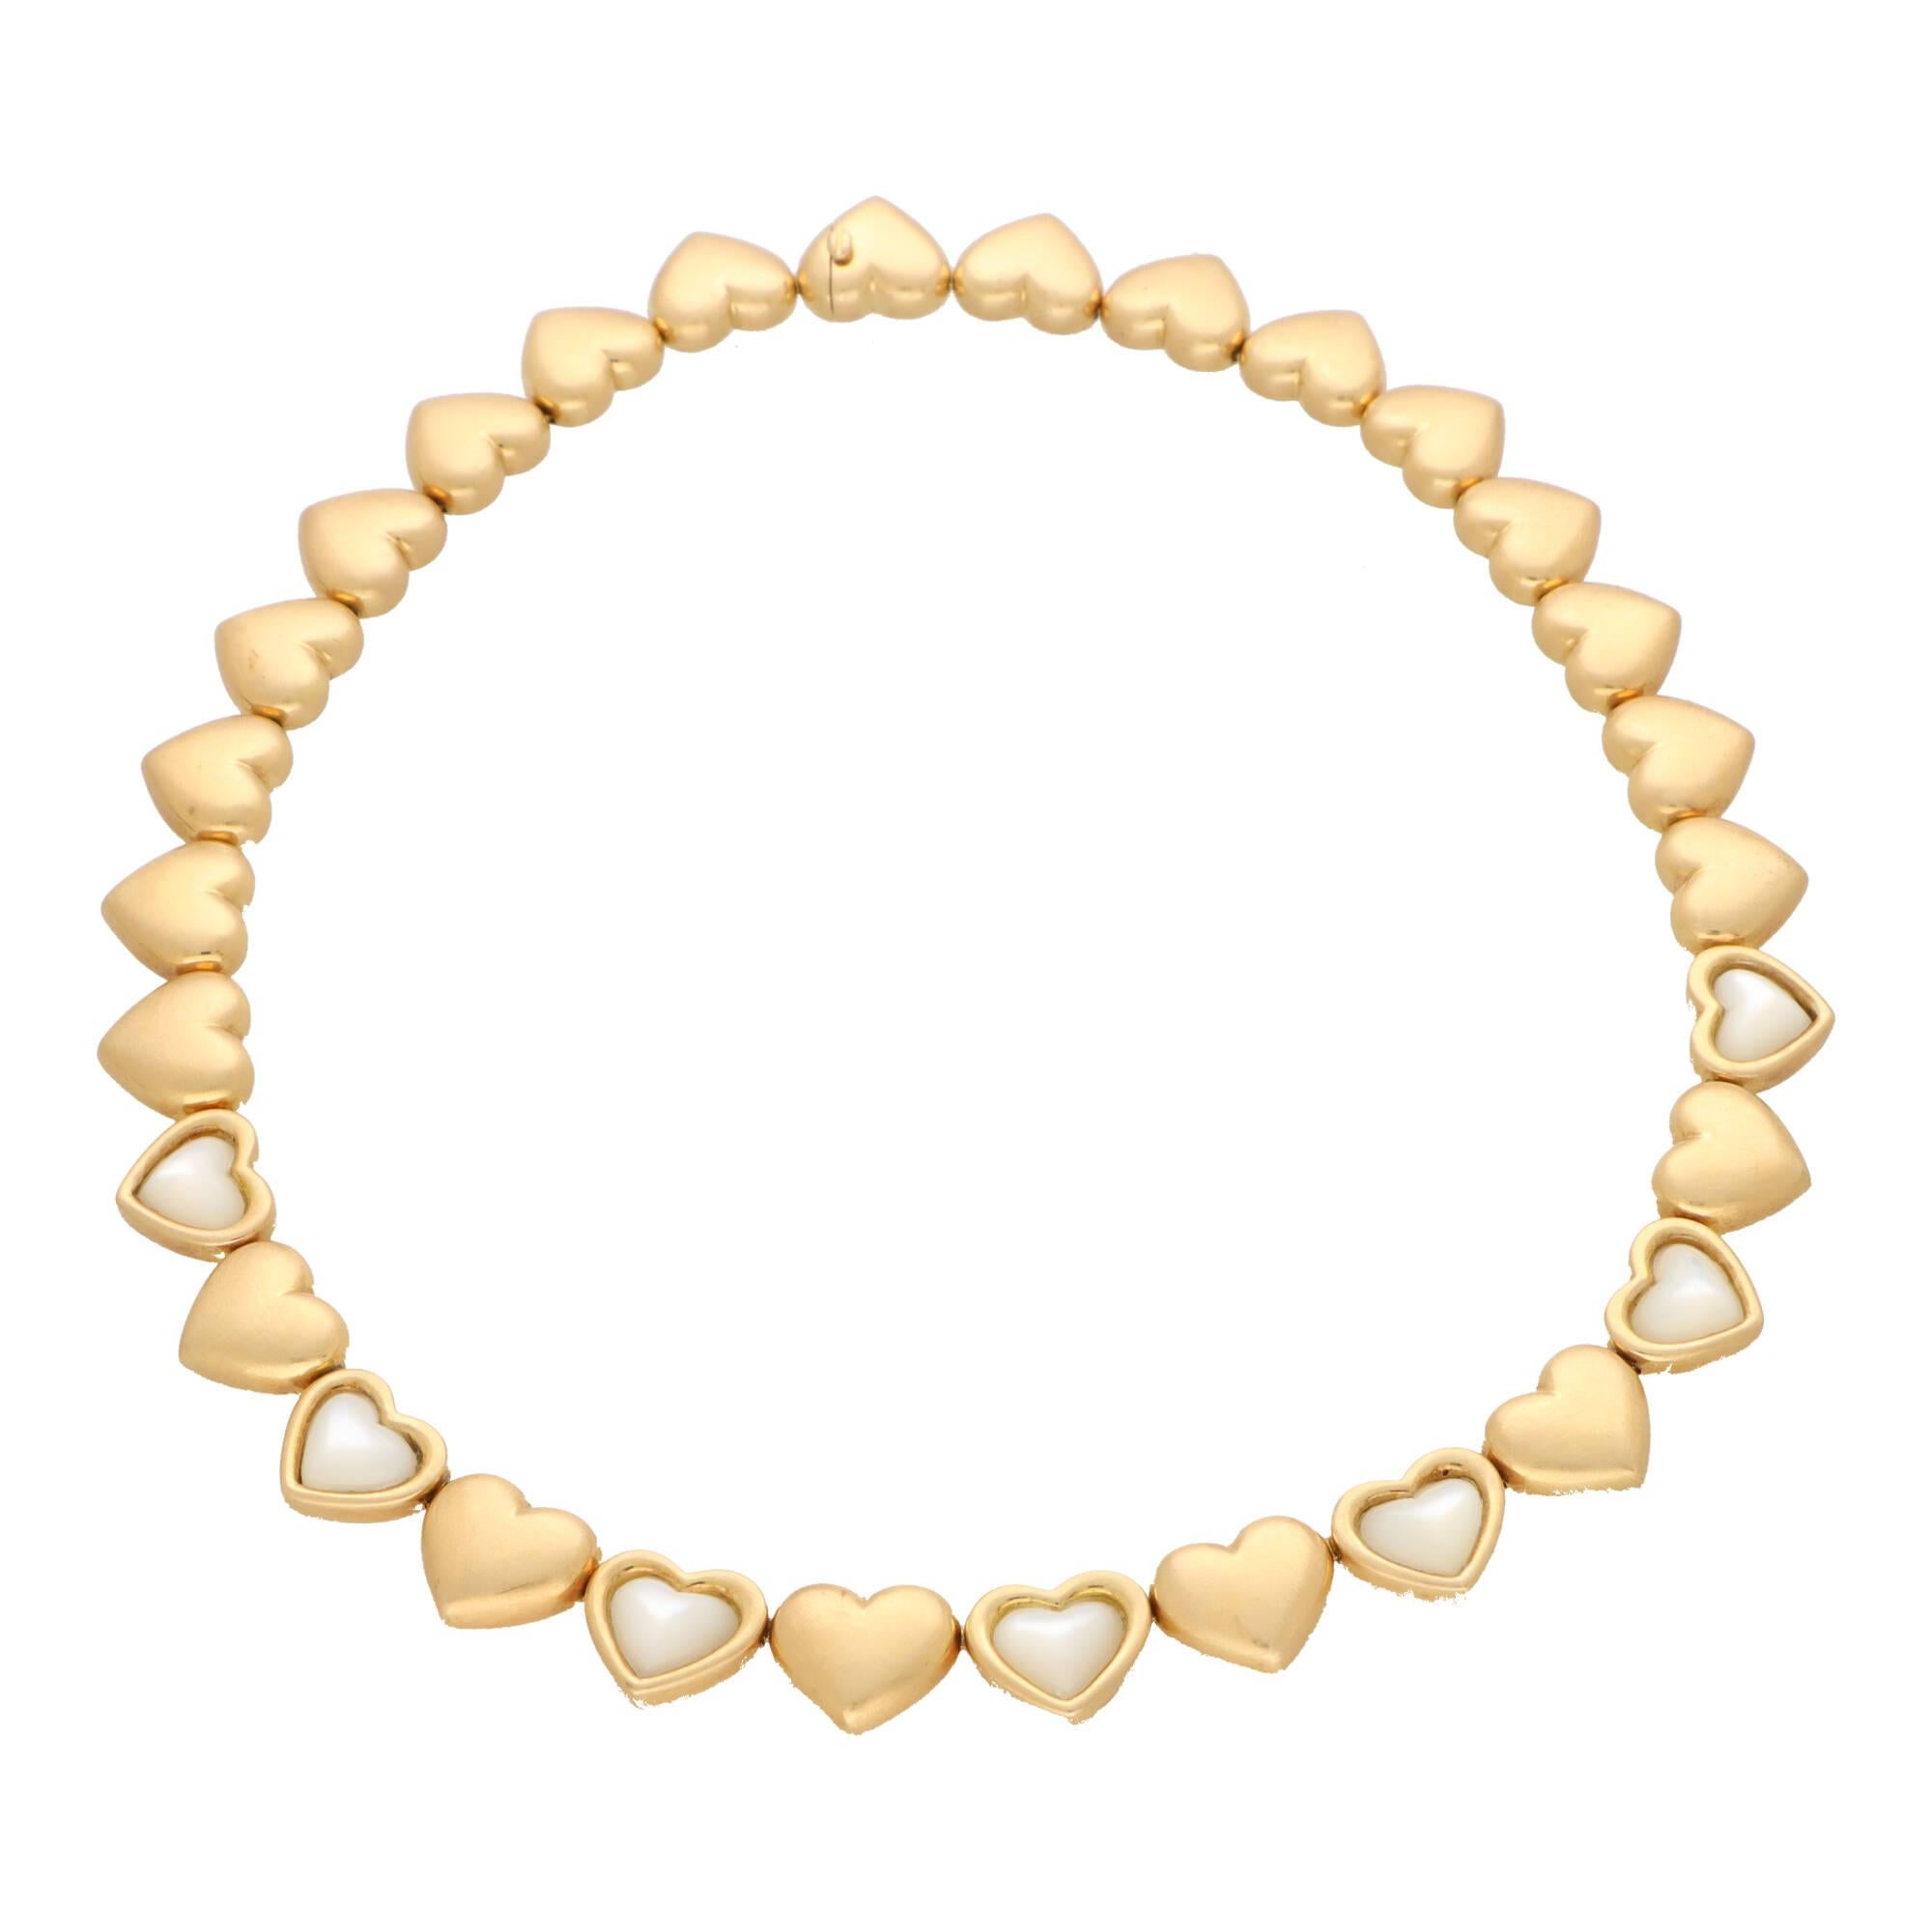 A beautiful vintage Mauboussin mother of pearl heart necklace set in 18k yellow gold.

The necklace is composed of 30 individual brushed yellow gold heart motif links, connected together via an articulated fastening. Towards the centre aspect of the